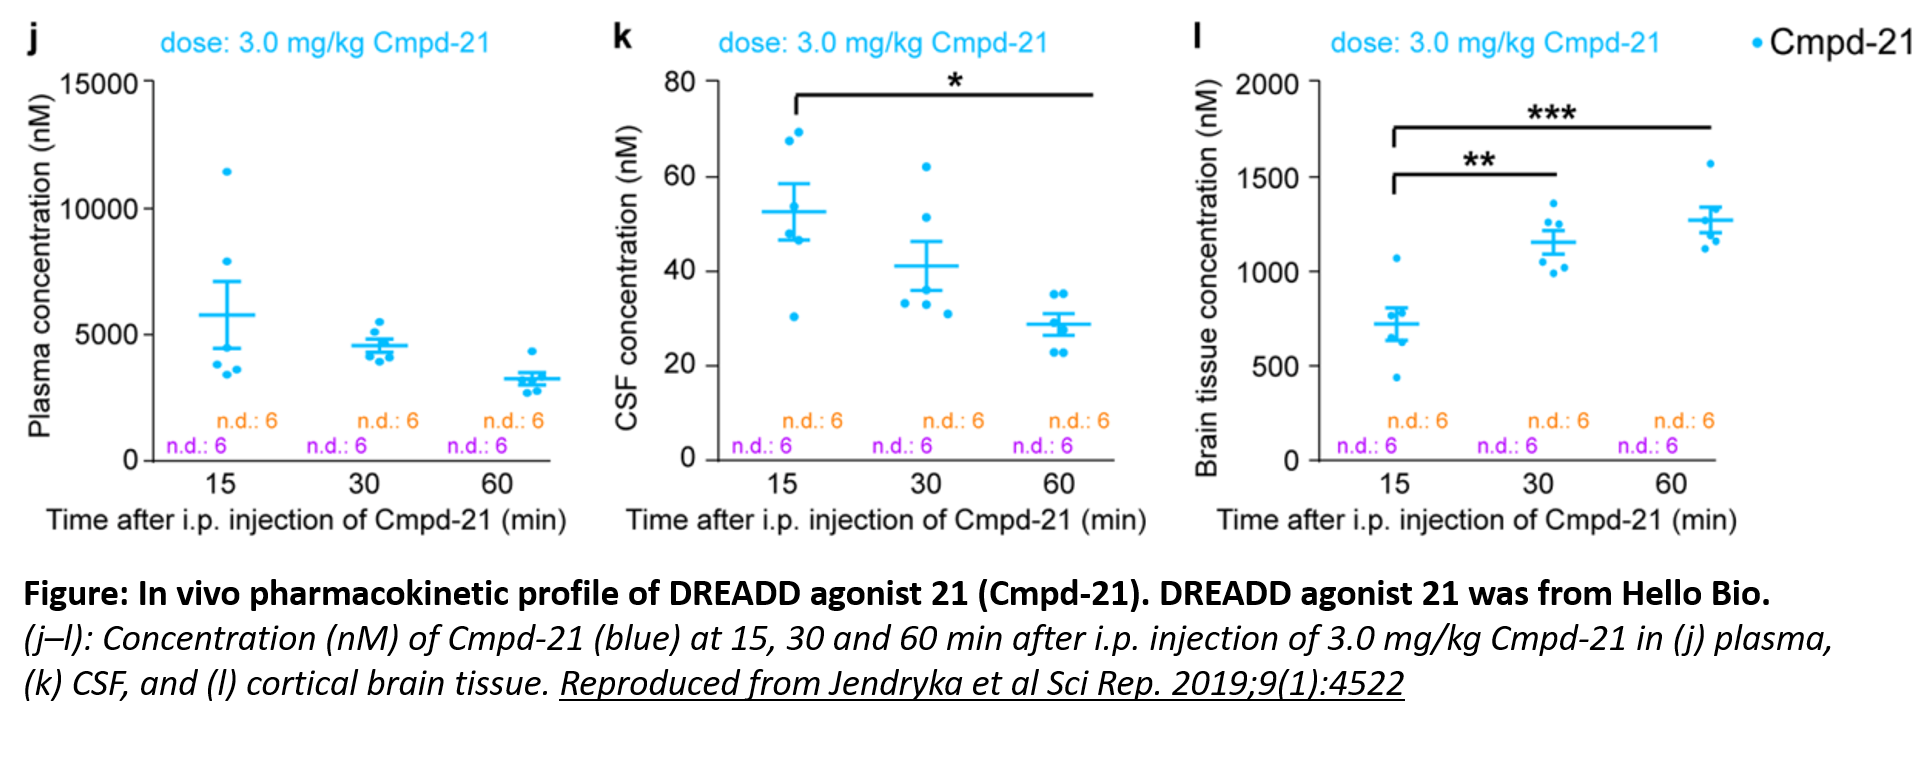 HB6124 In vivo pharmacokinetic profile of DREADD agonist 21 (Cmpd-21)